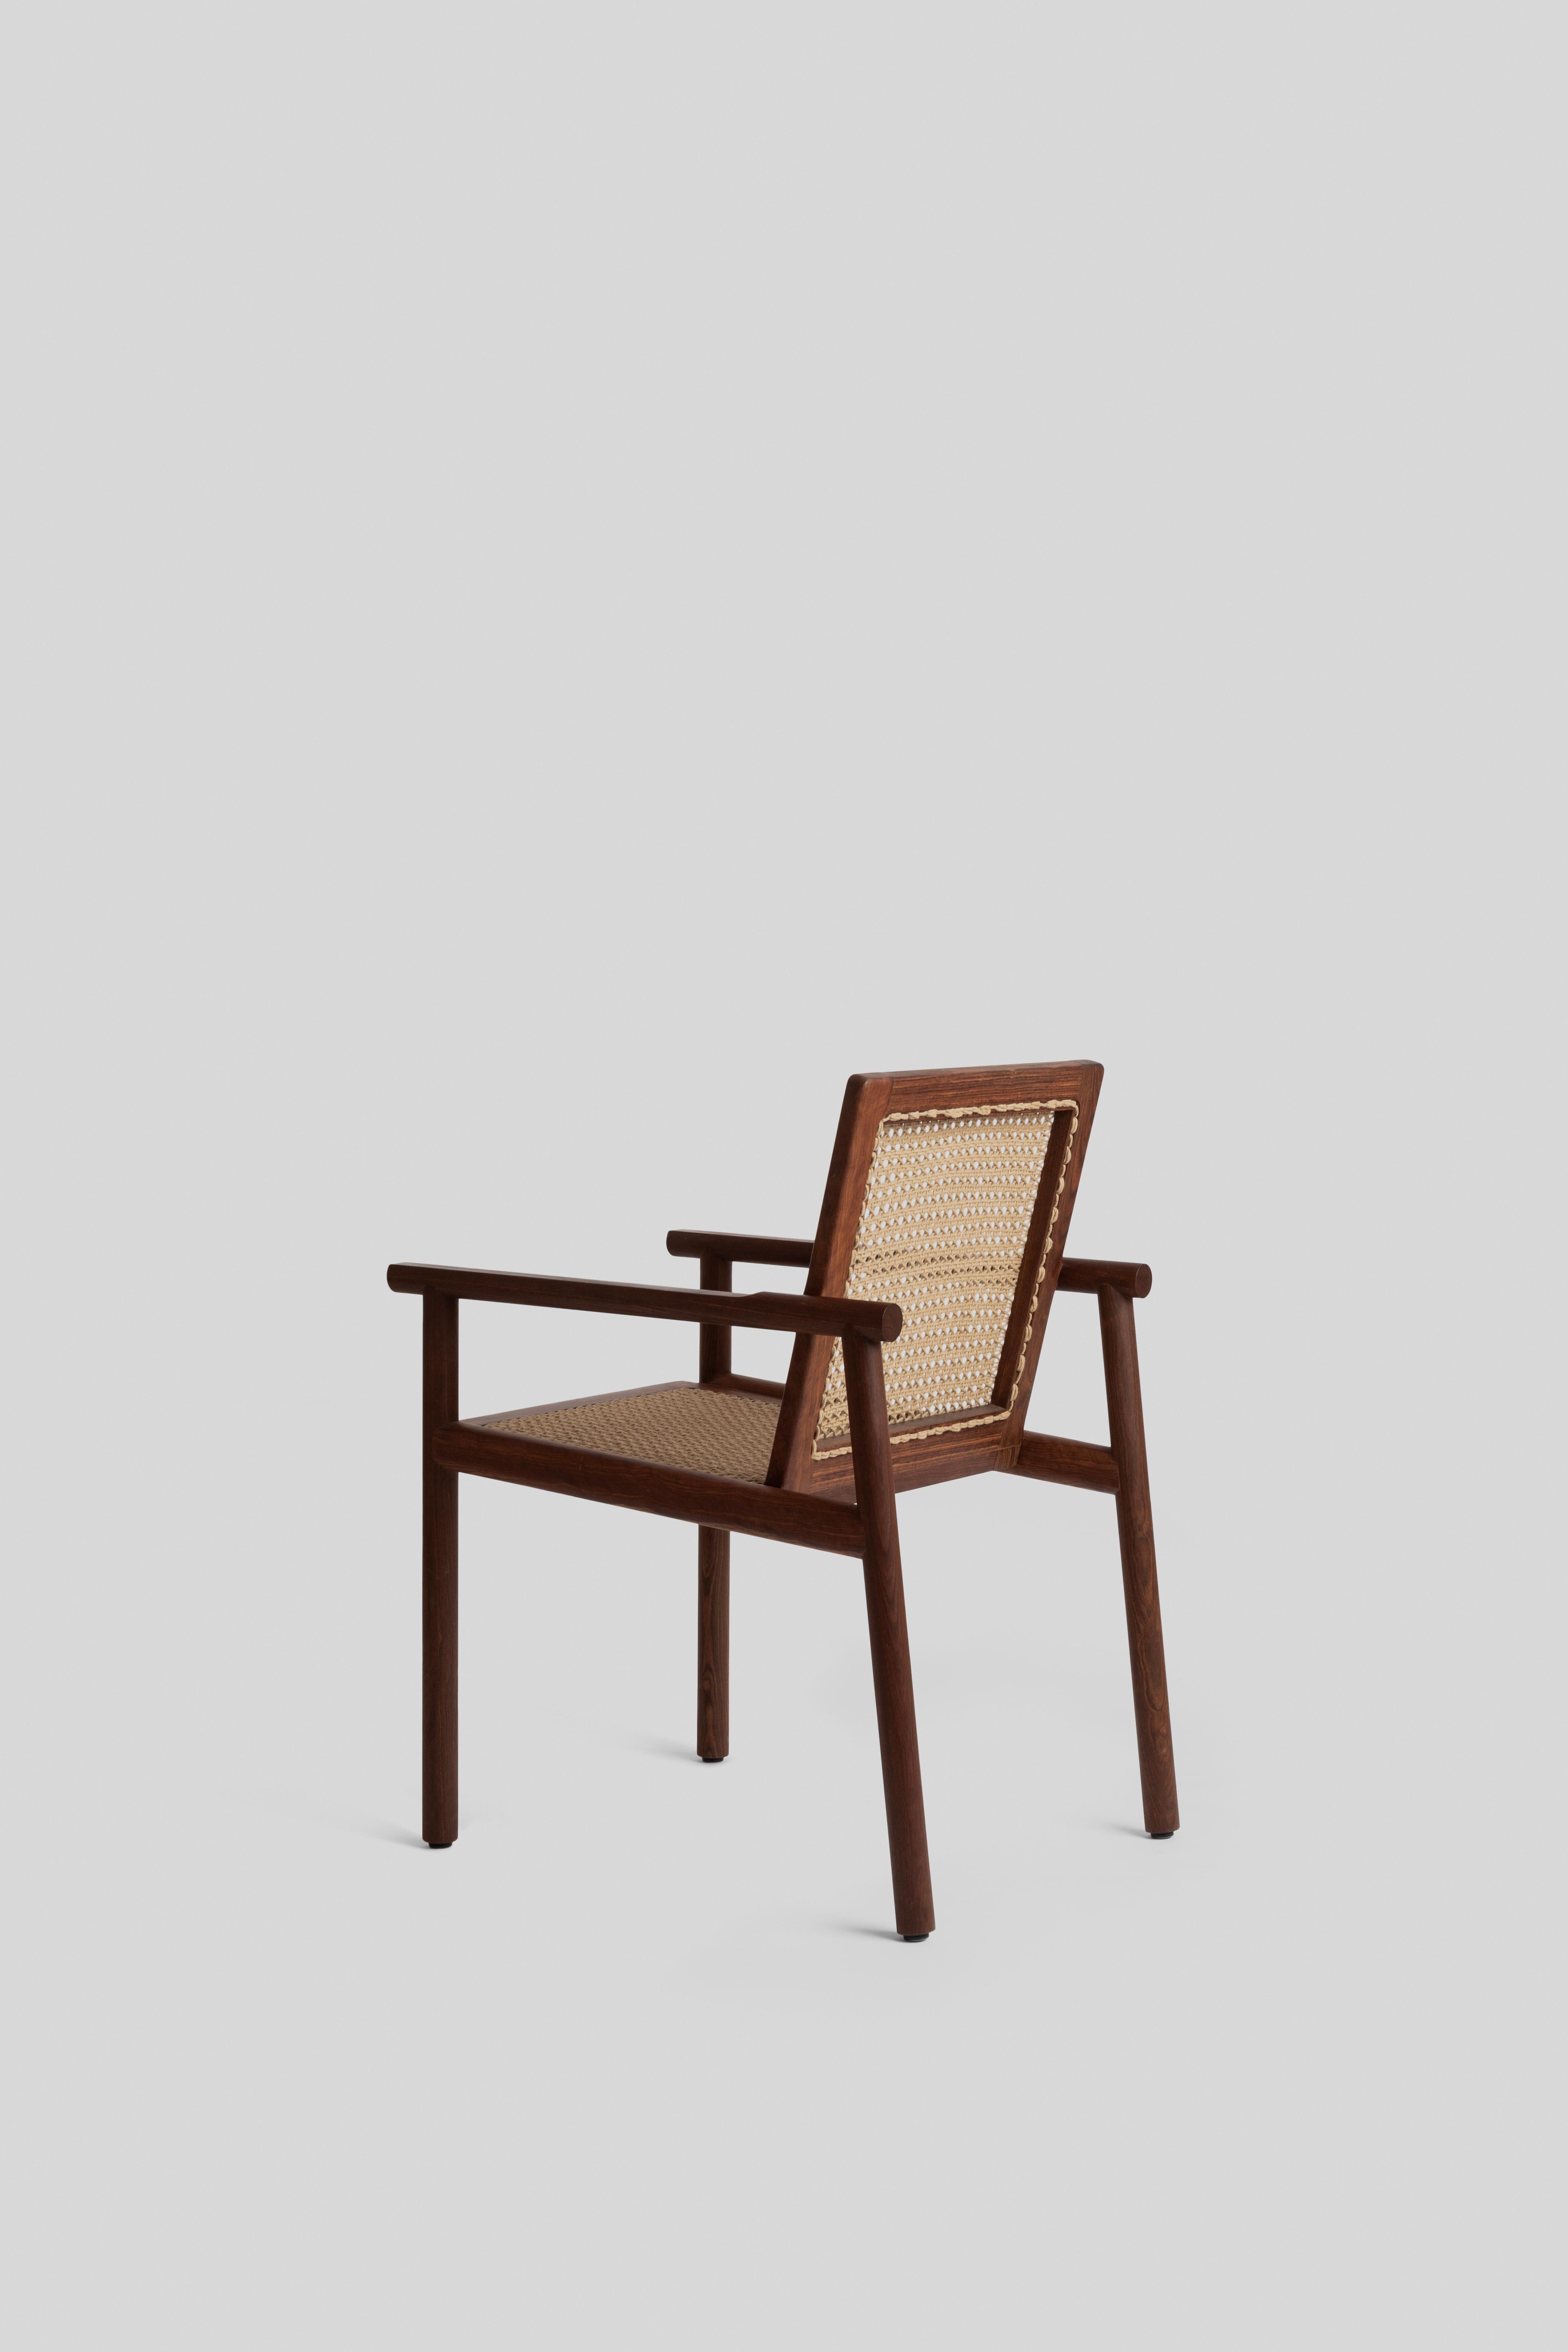 Contemporary and Mexican design, produced in Mexico, chair, by ITZ  1